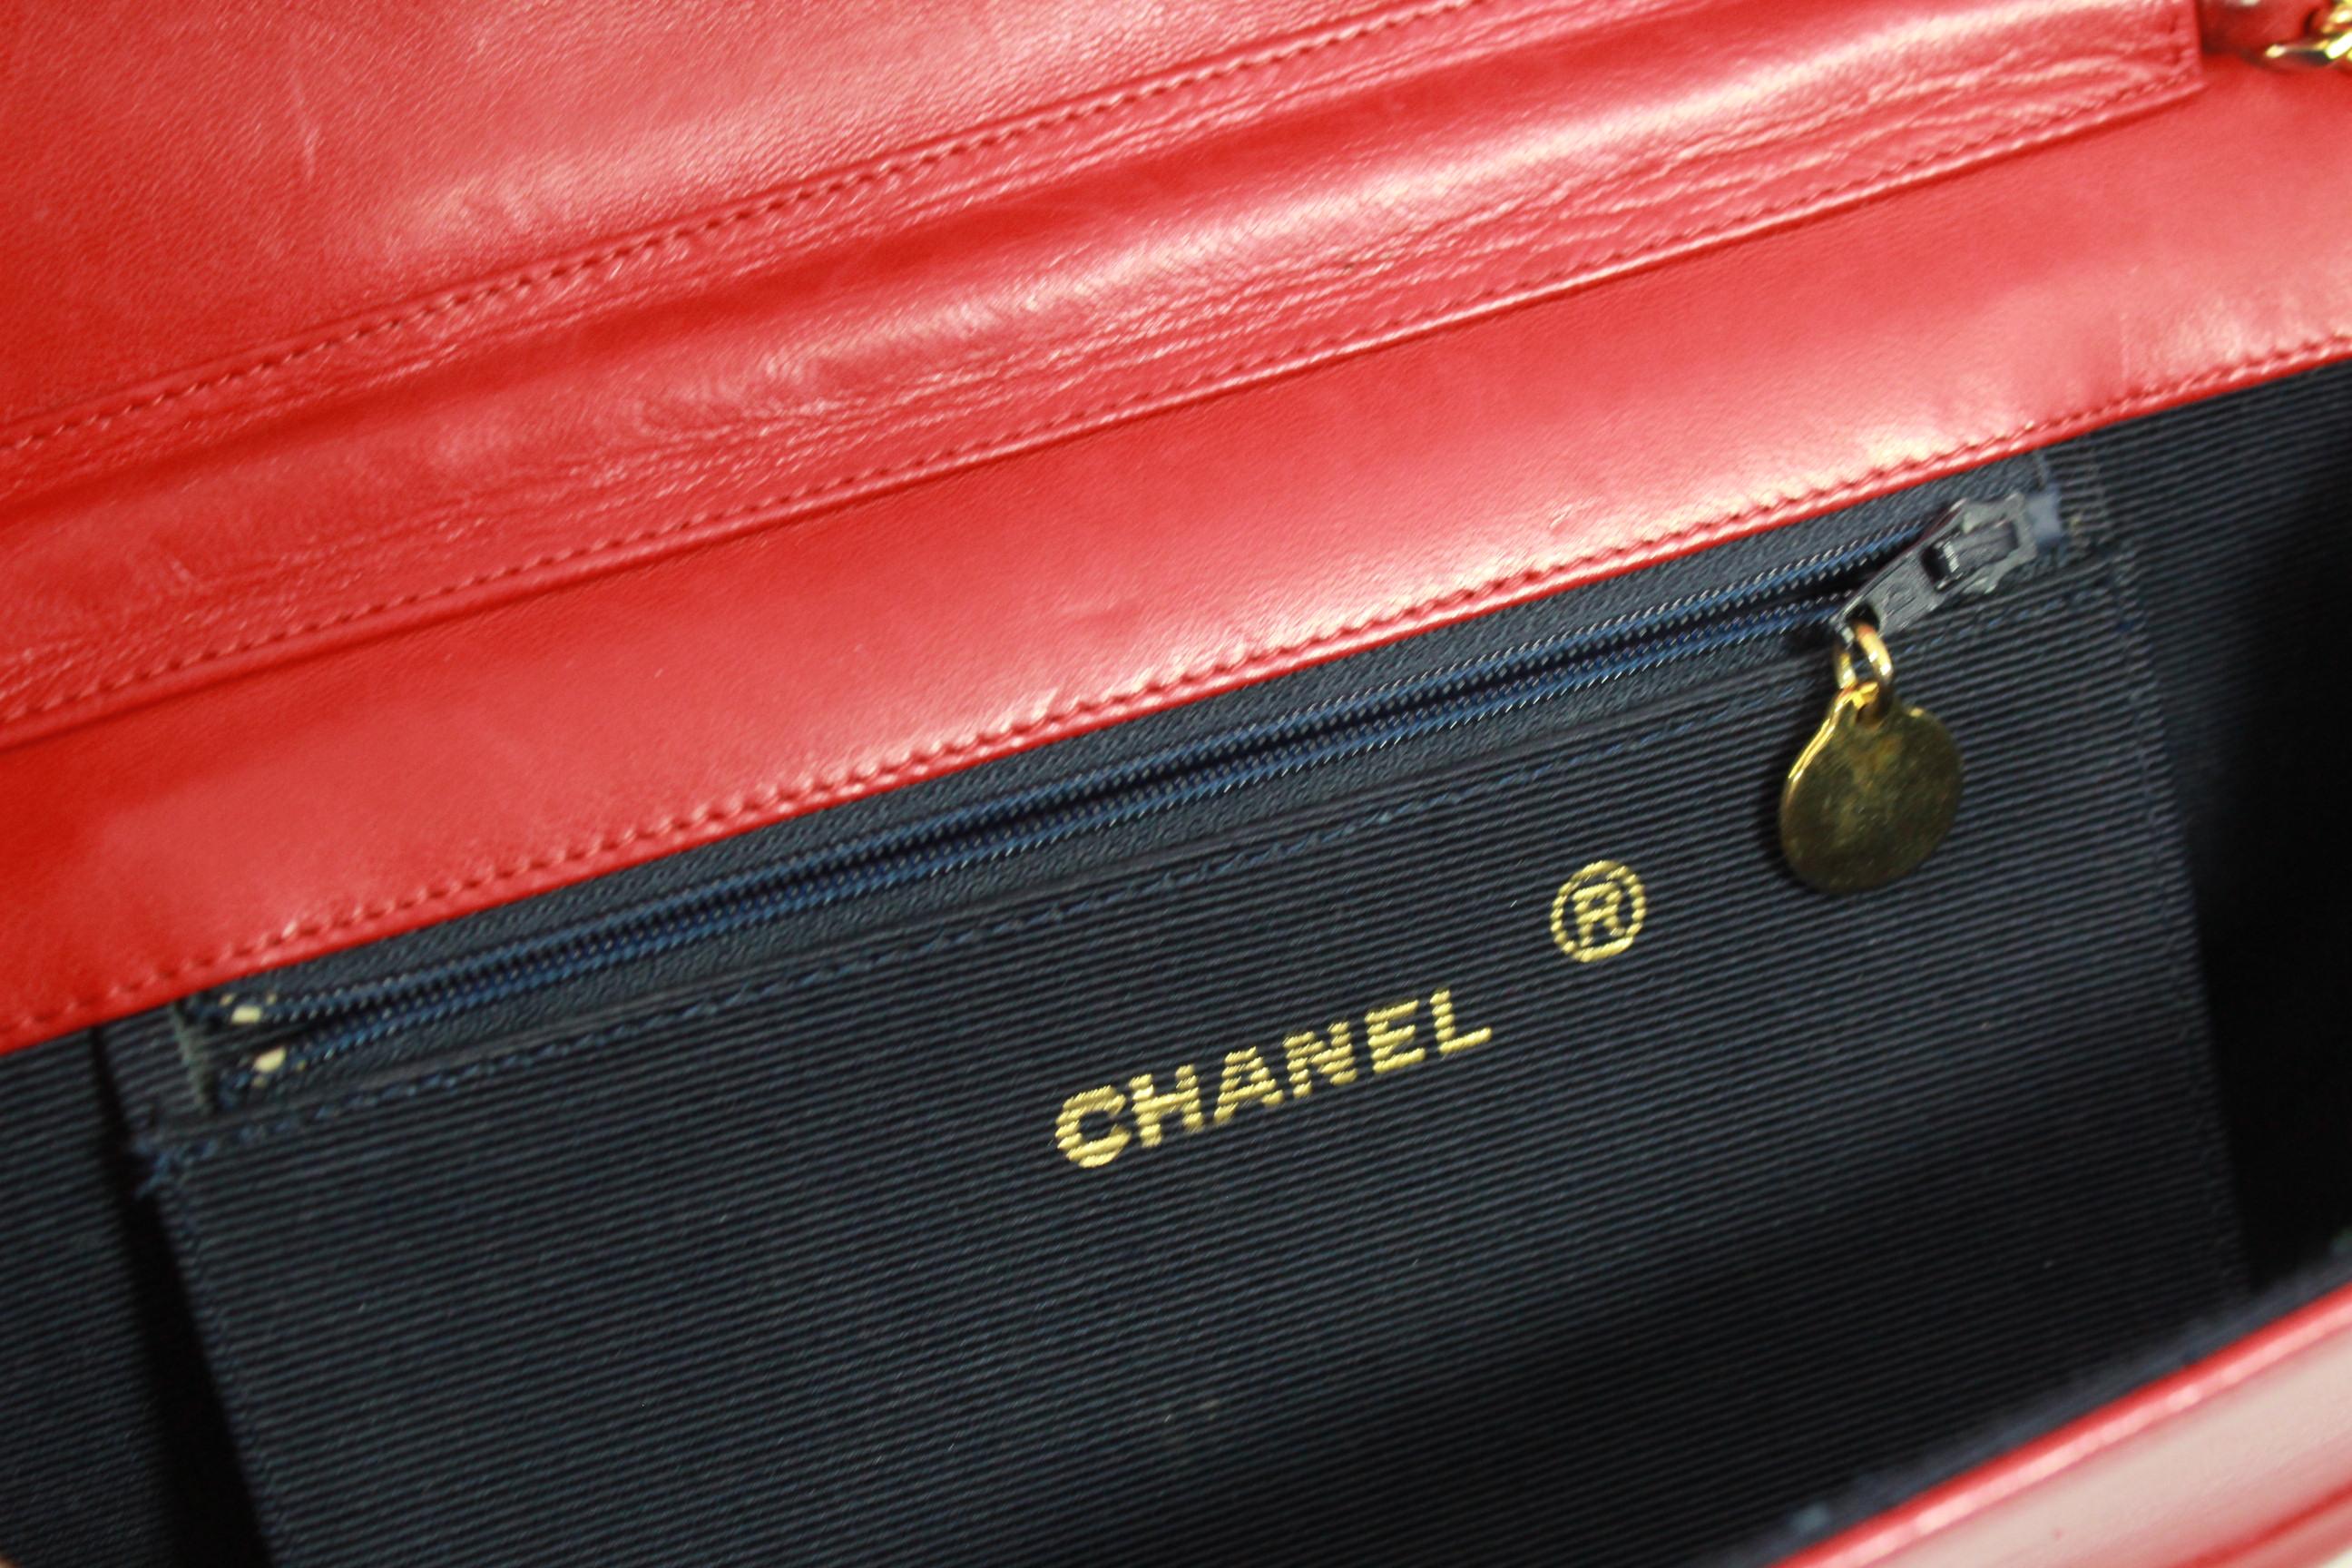 Vintage Chanel Red Lambskin Round Leather Bag 1